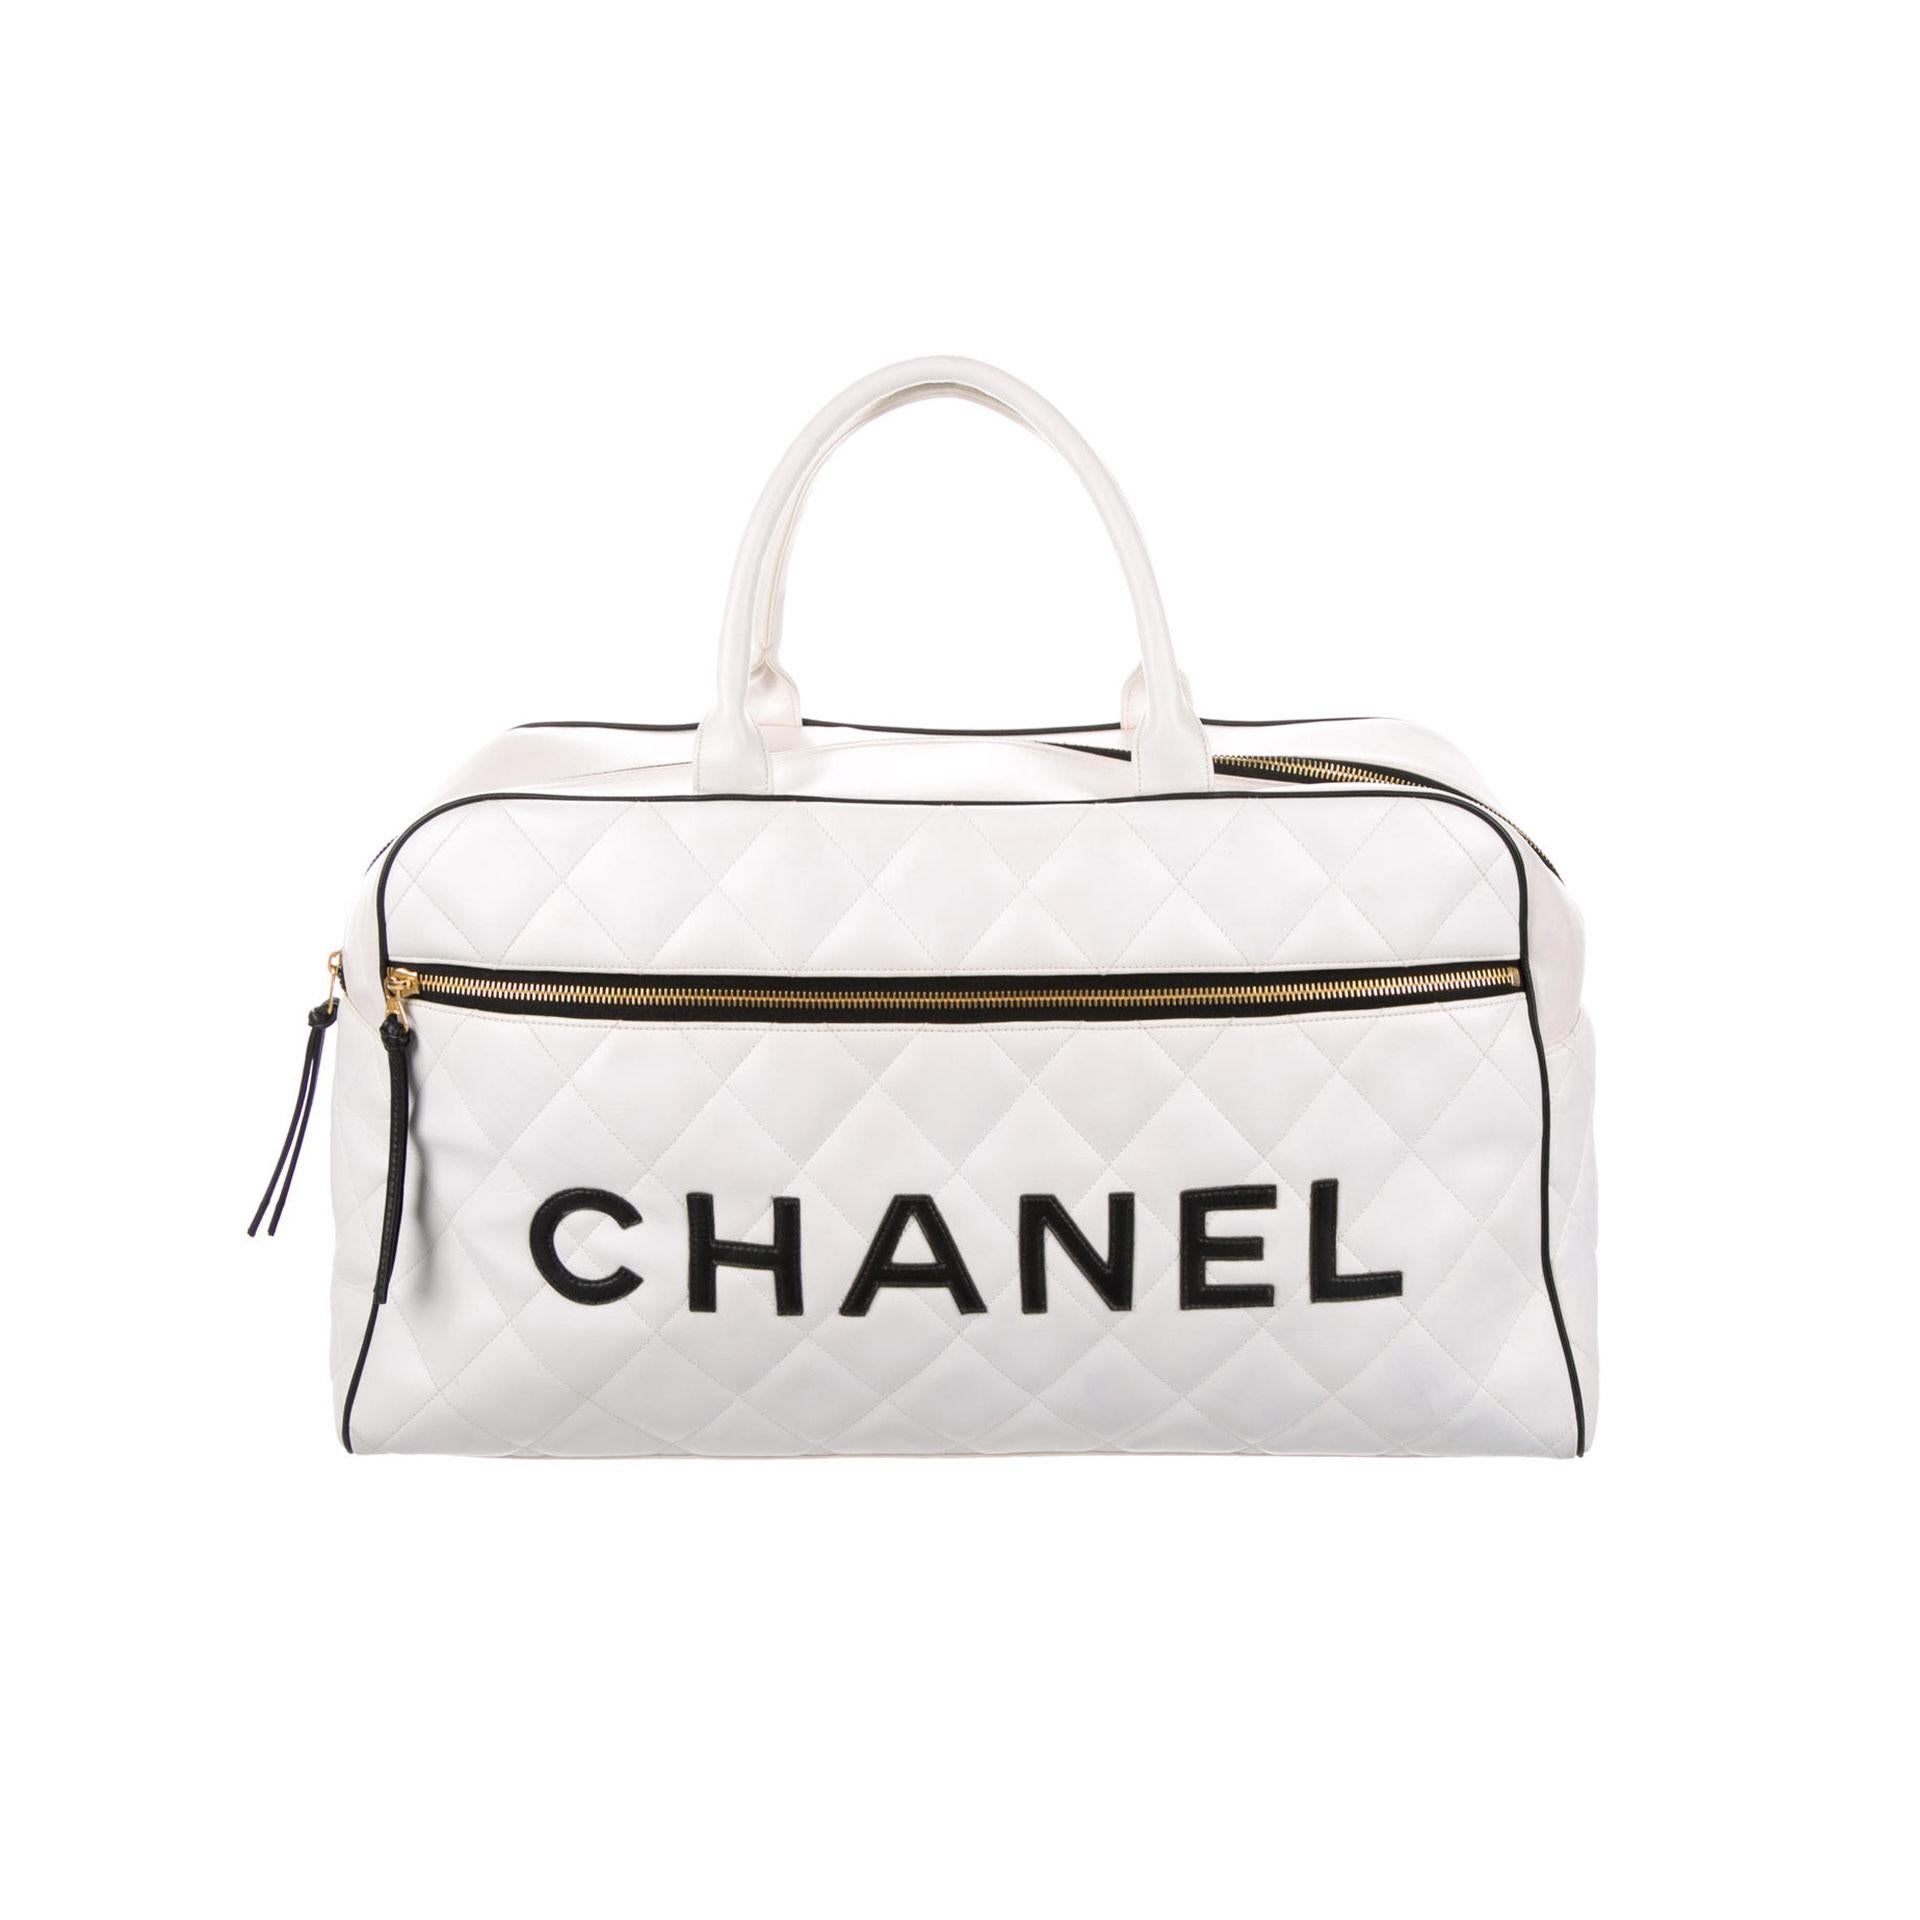 Chanel Limited Edition Vintage Duffel Tote White and Black Leather Weekend Bag In Good Condition For Sale In Miami, FL